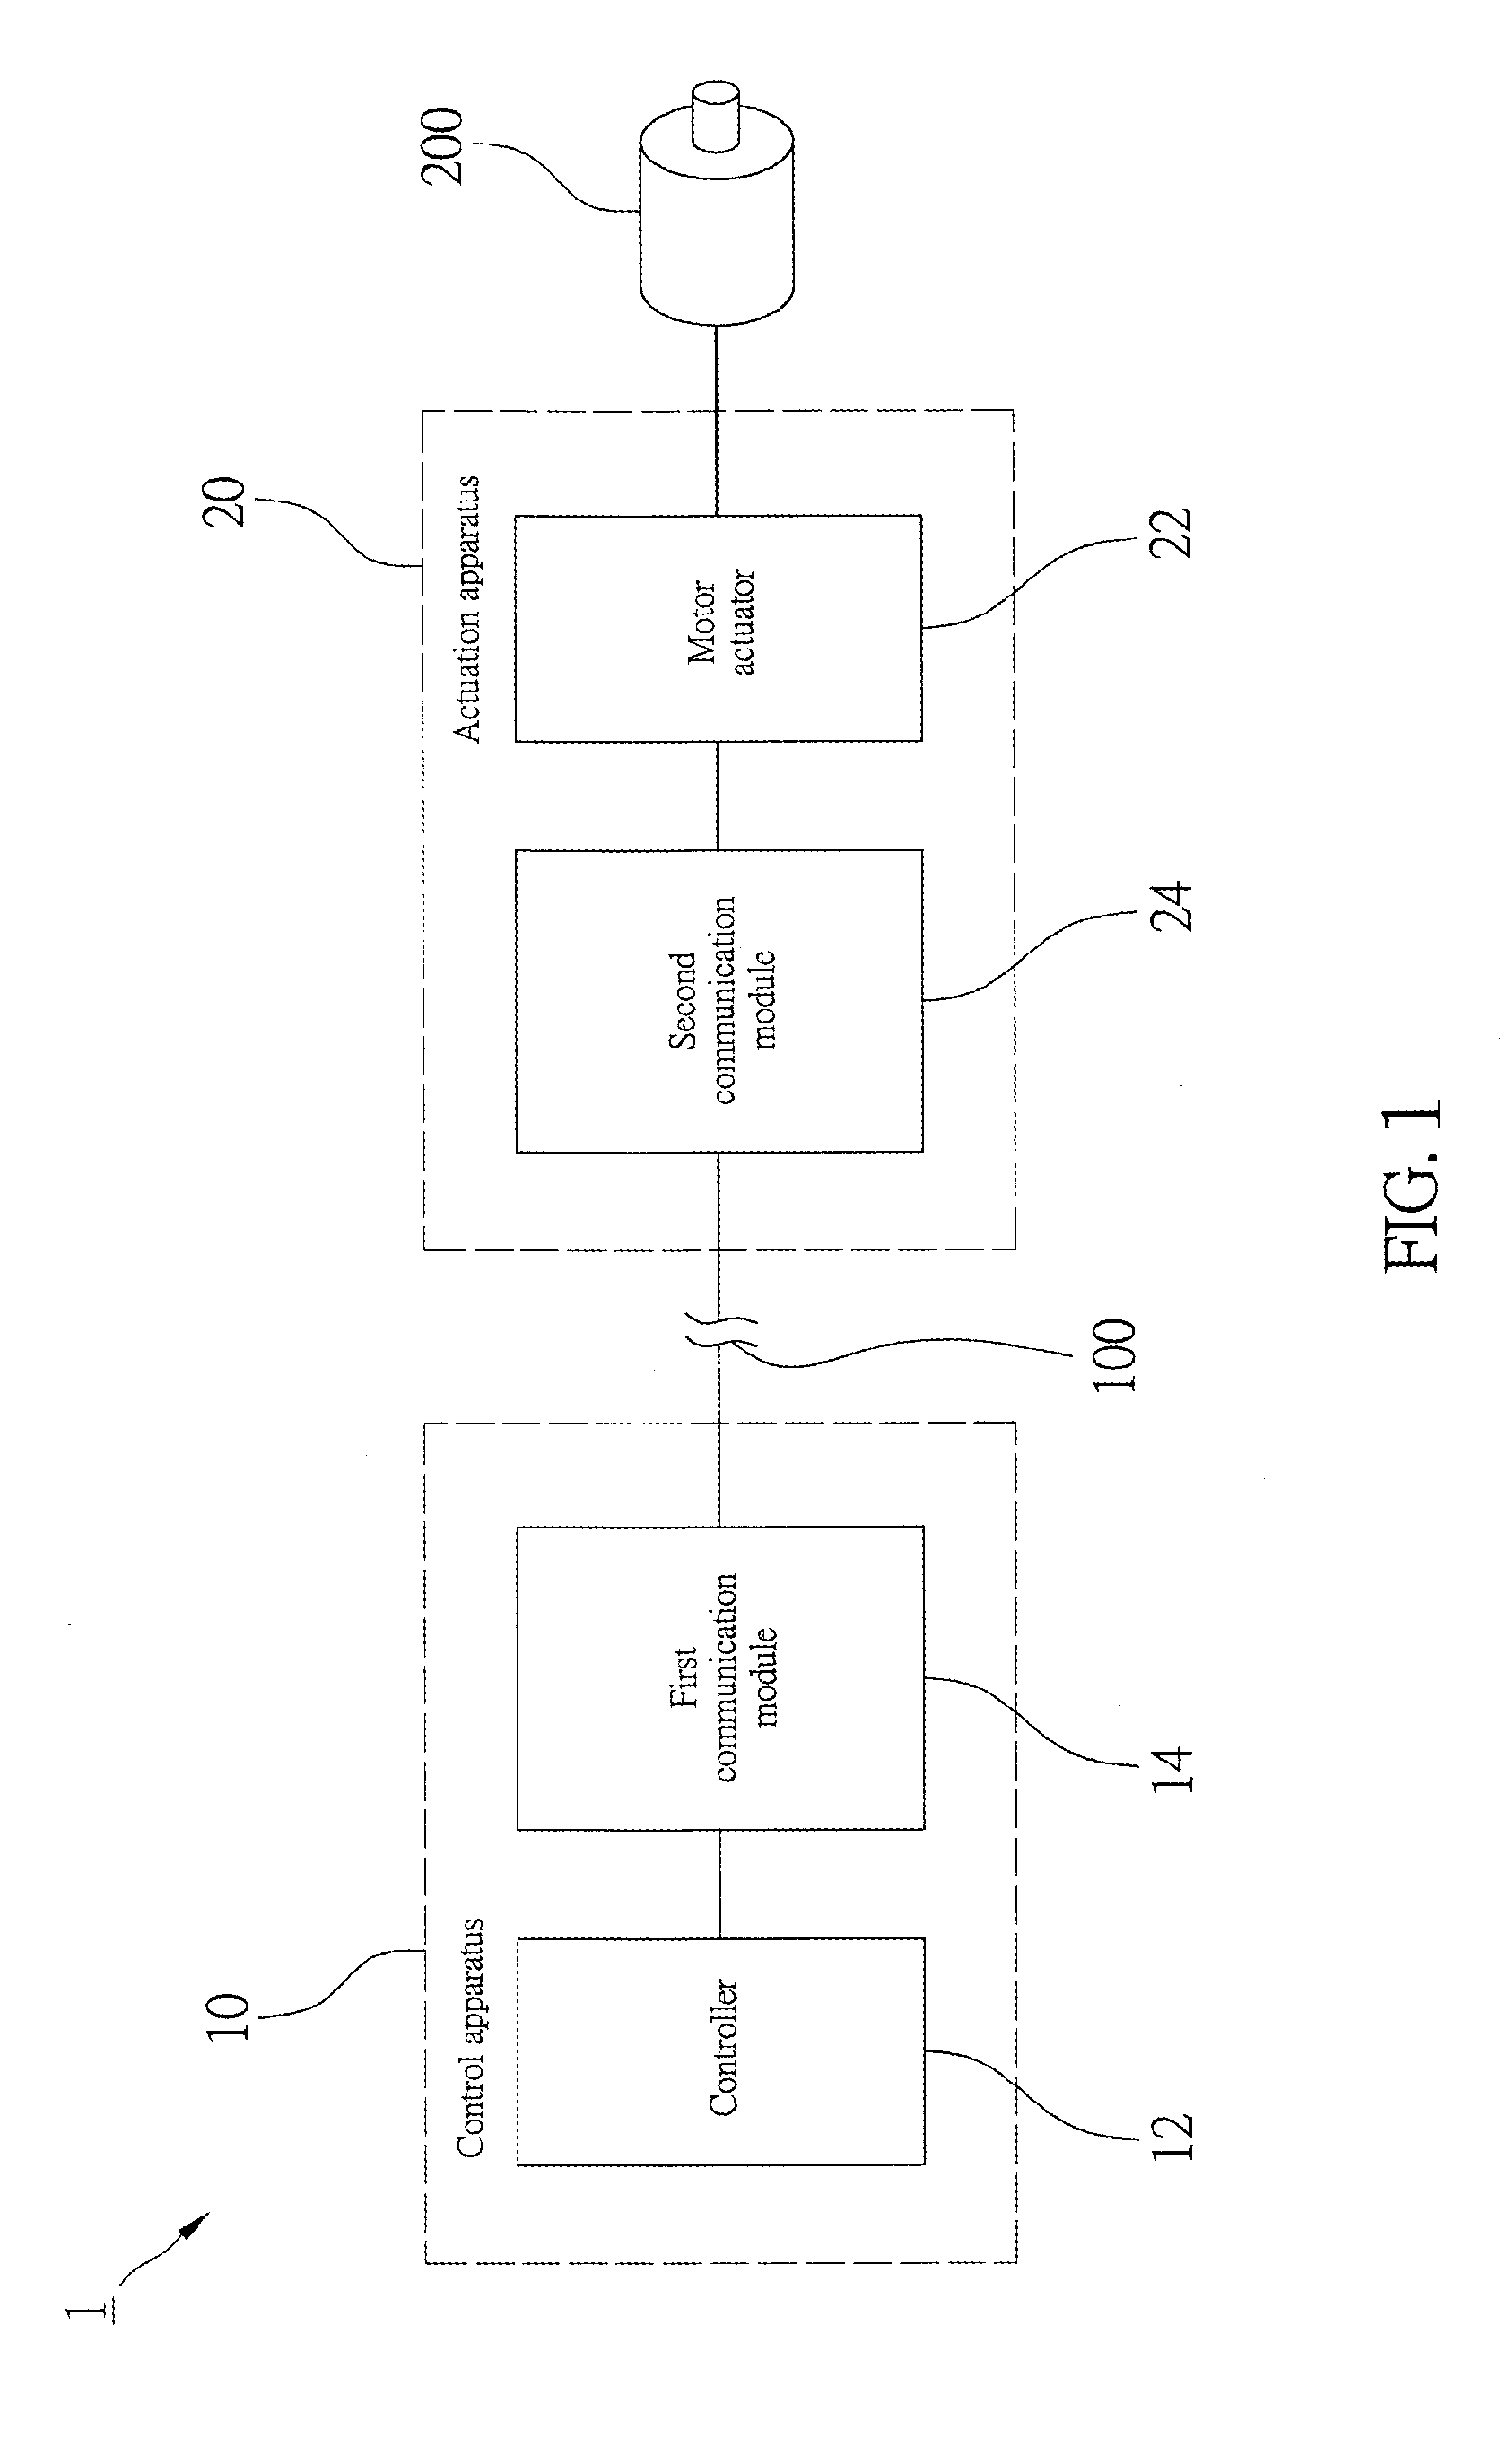 Motor control system and the method of controlling motor